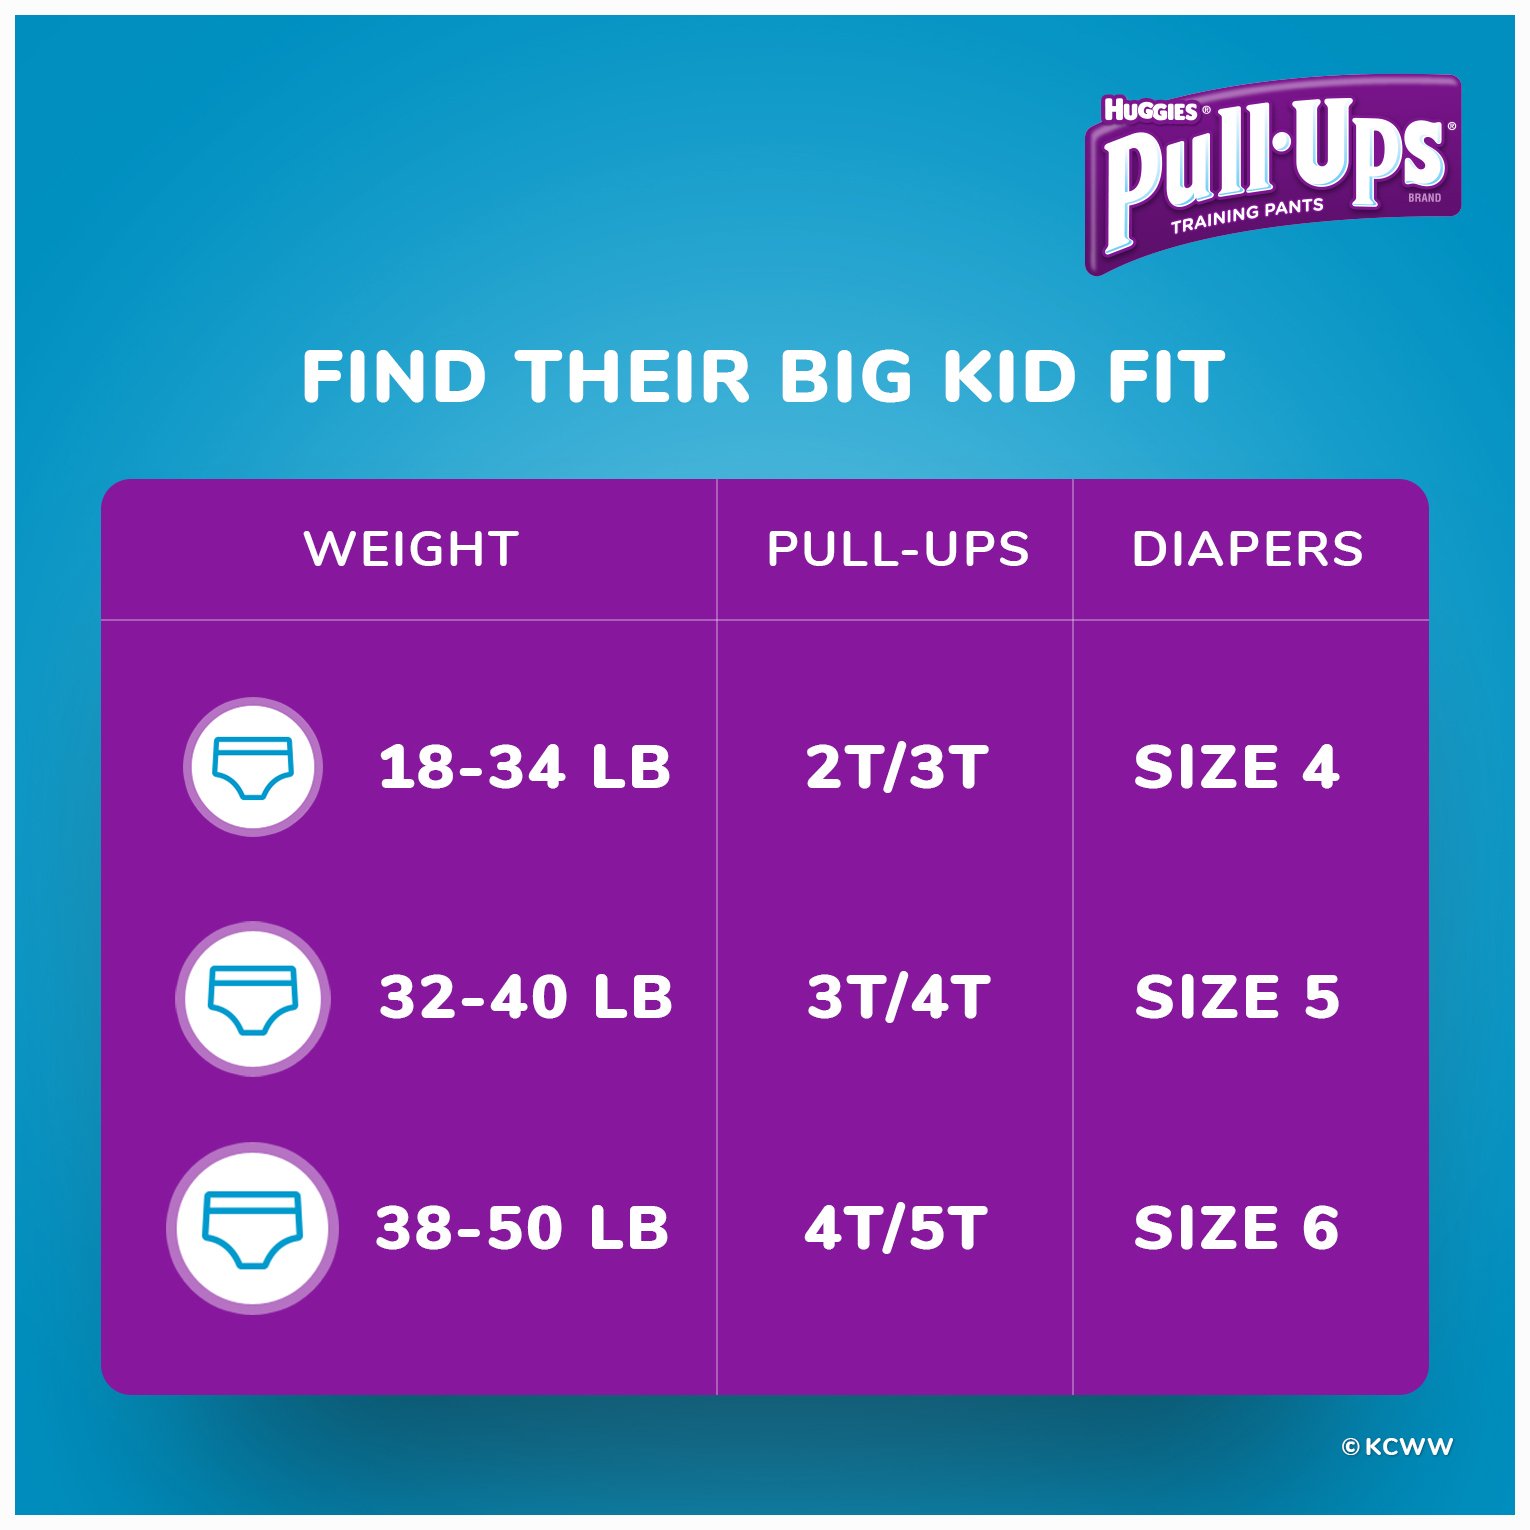 Pull-Ups Night-Time Potty Training Pants for Boys, 3T-4T (32-40 lb.), 20 Ct. (Packaging May Vary) - image 5 of 8